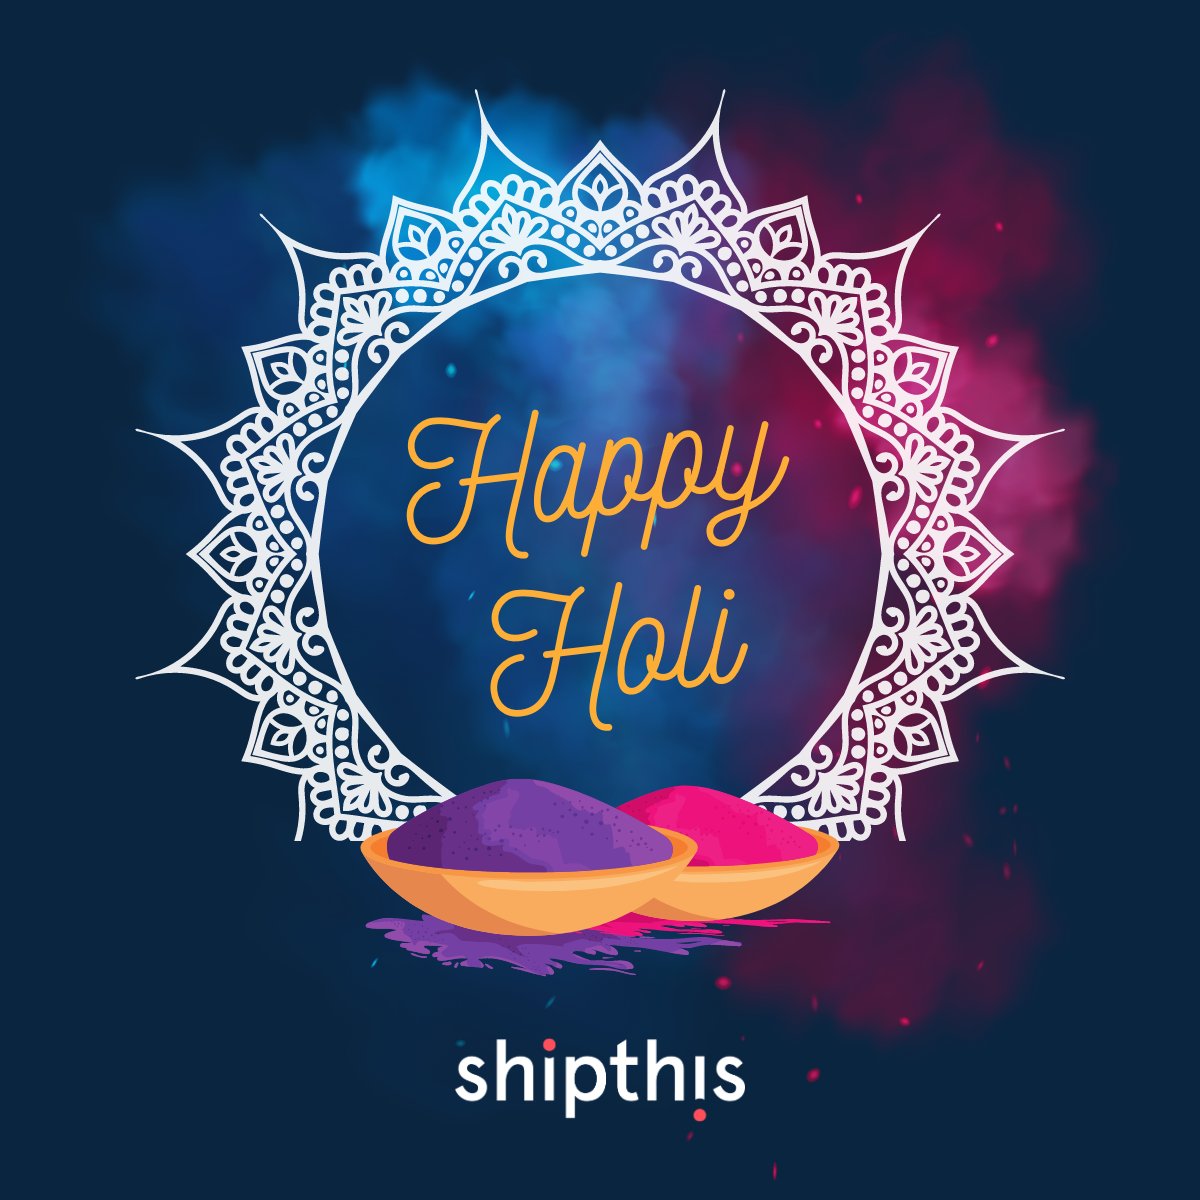 May the vibrant hues of Holi bring joy, harmony, and prosperity to all! Wishing everyone a colorful and blessed celebration filled with love and laughter. Happy Holi! #Shipthis #Holi #FestivalOfColors